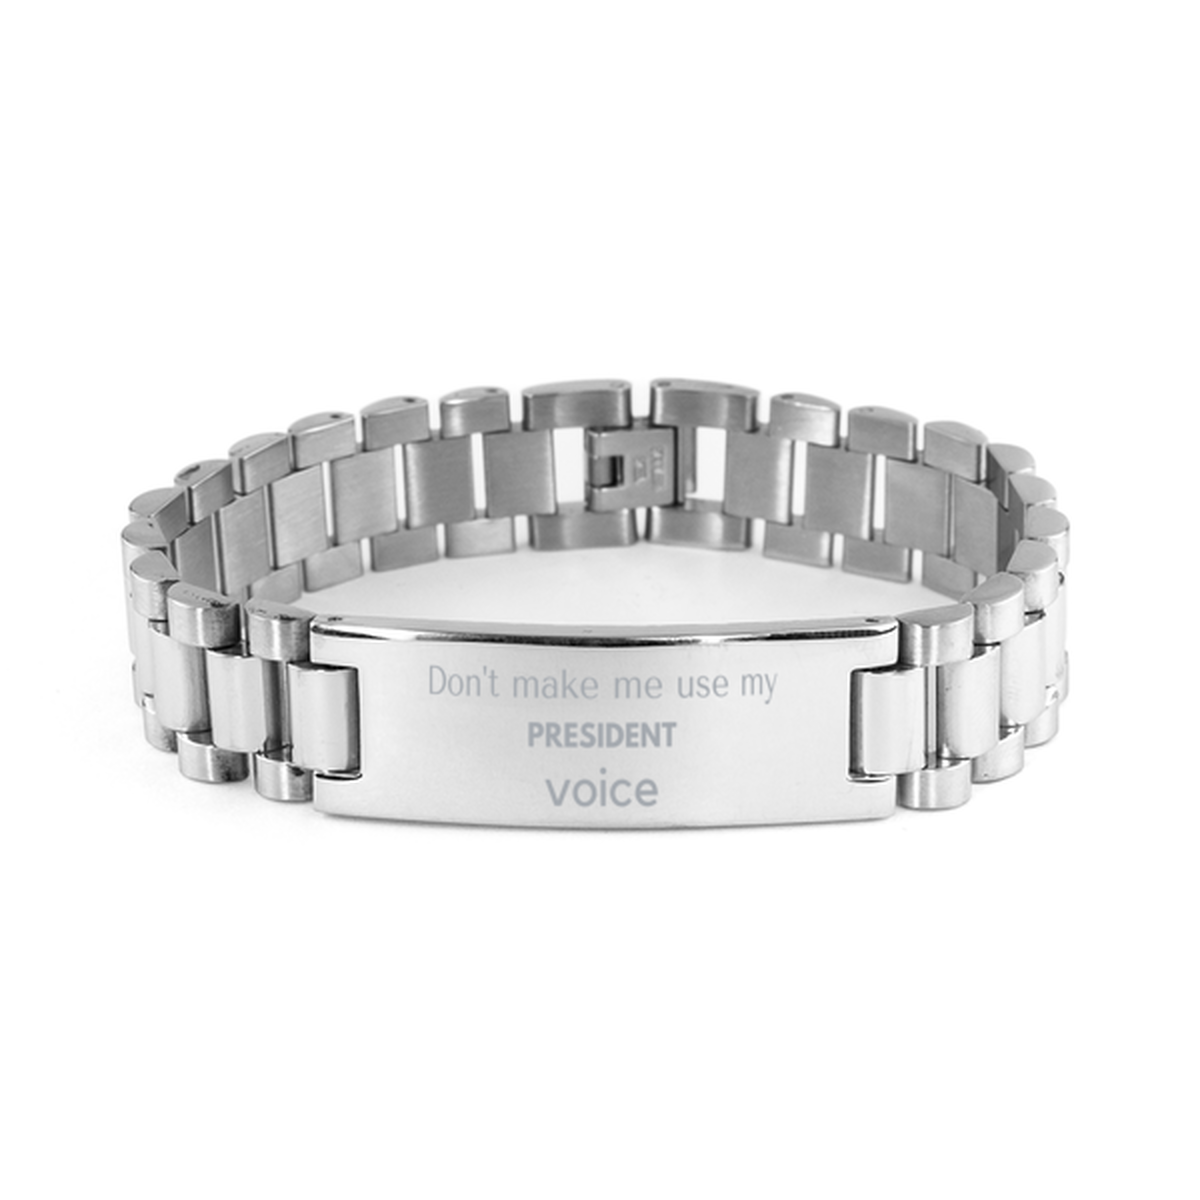 Don't make me use my President voice, Sarcasm President Gifts, Christmas President Ladder Stainless Steel Bracelet Birthday Unique Gifts For President Coworkers, Men, Women, Colleague, Friends